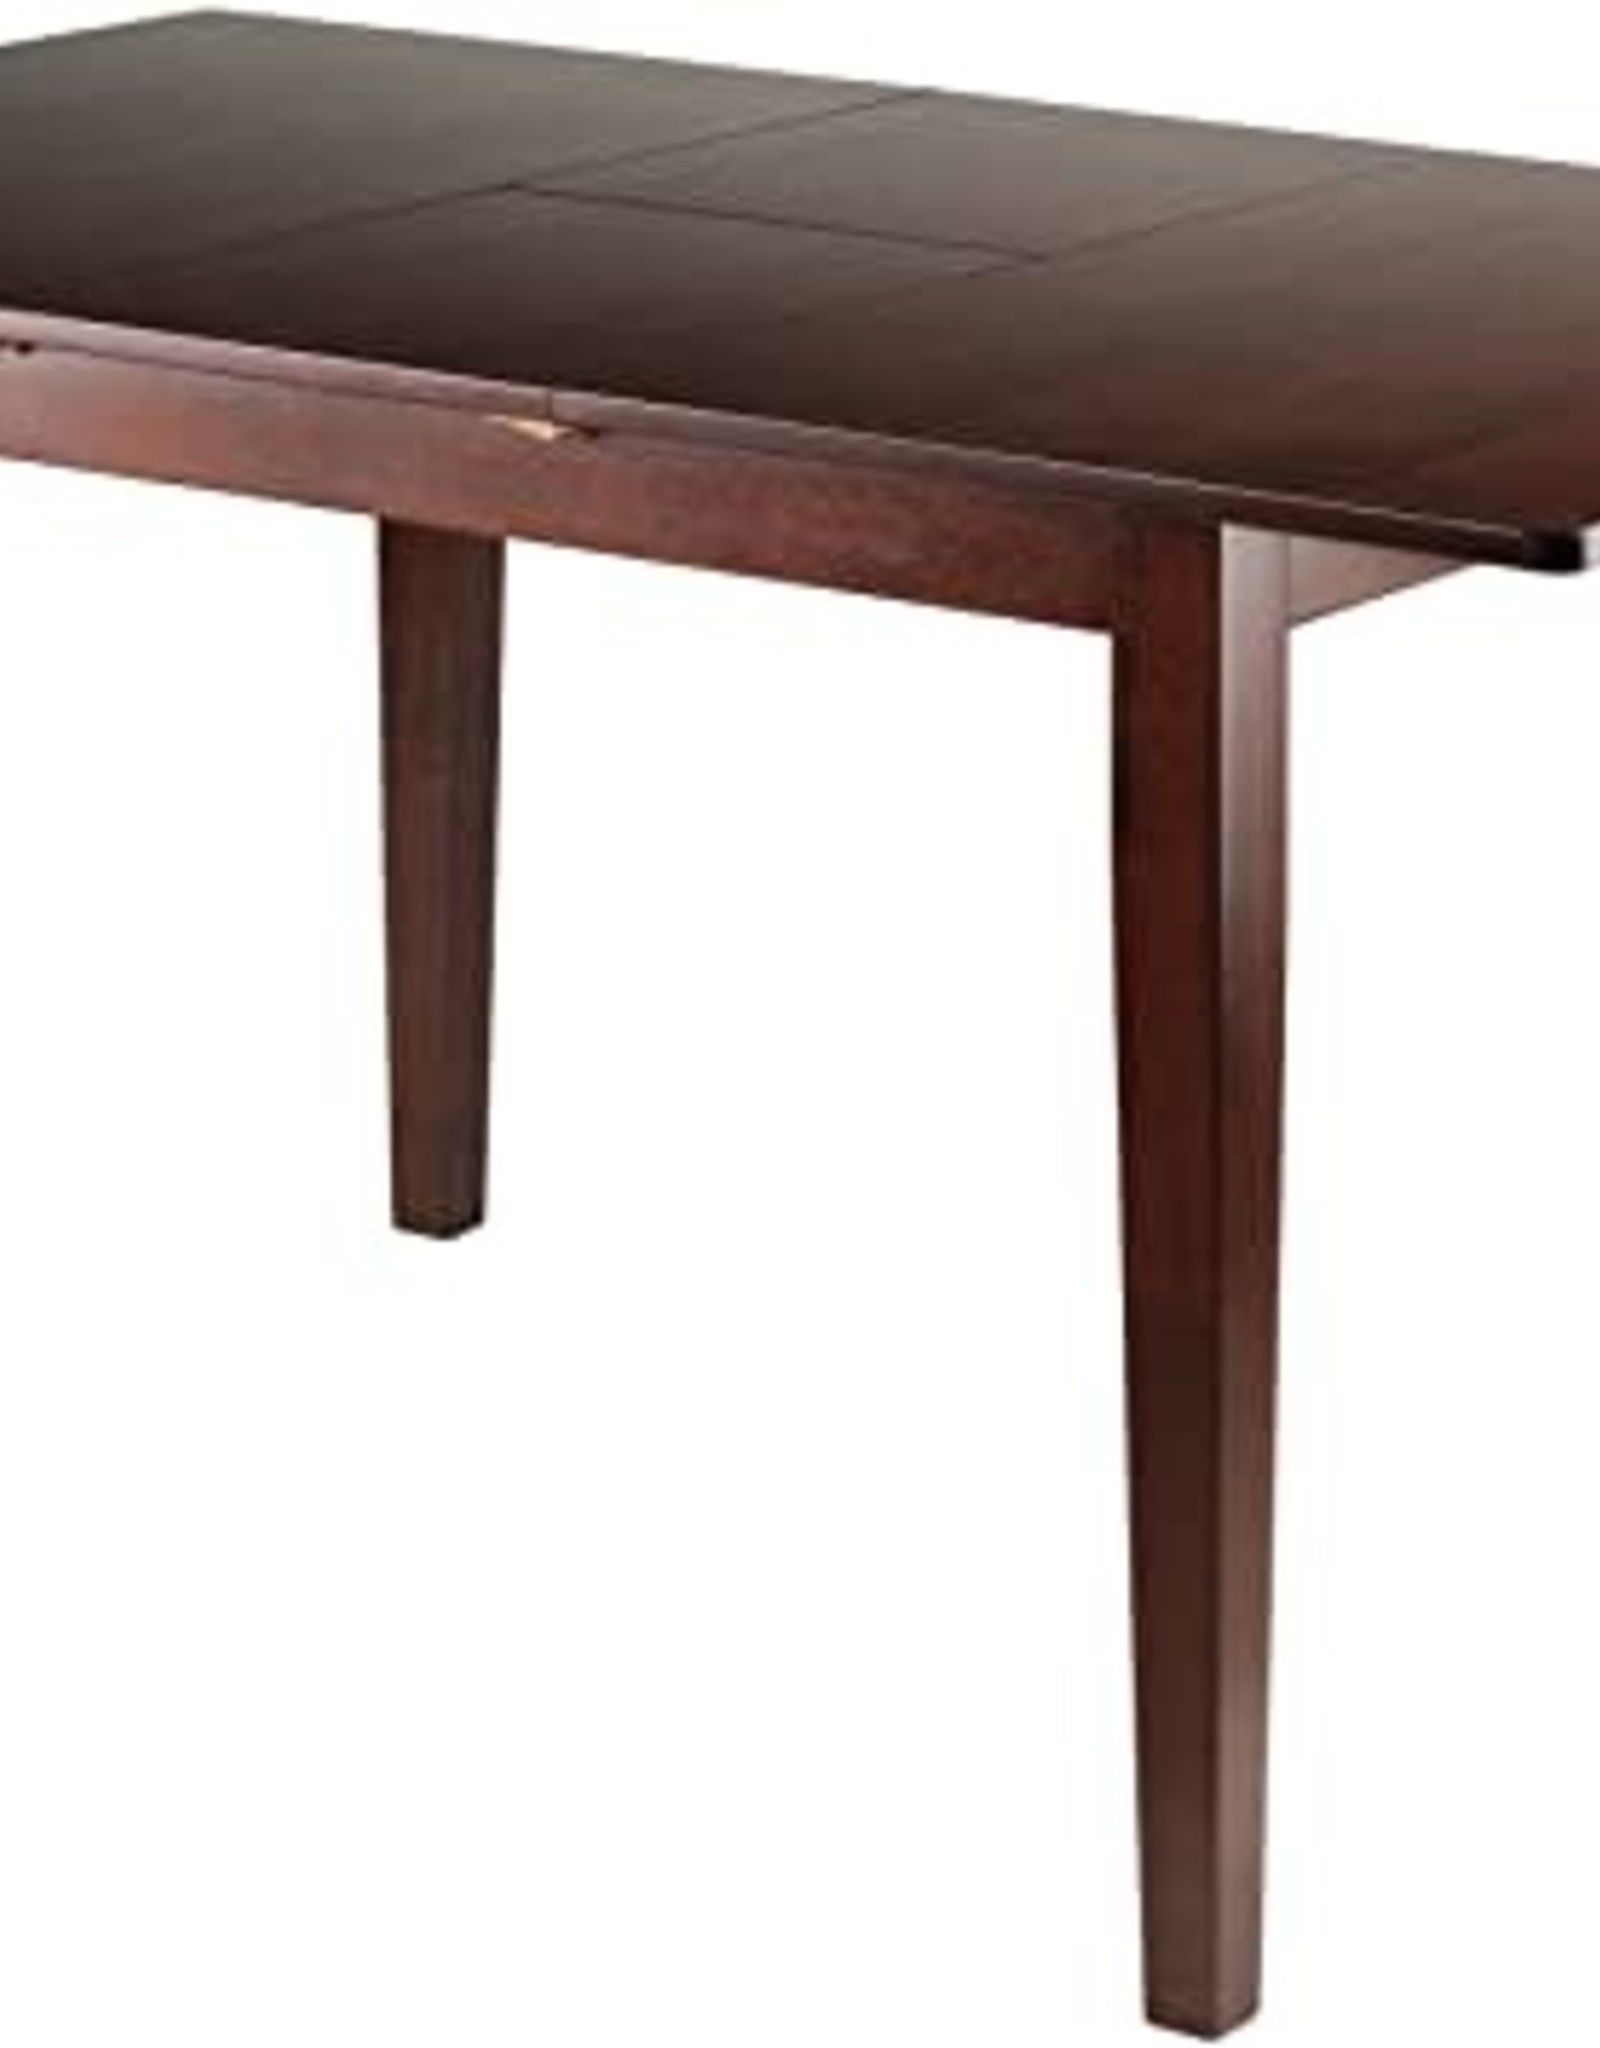 Winsome Anna Brown Walnut Extension Dining Room Table